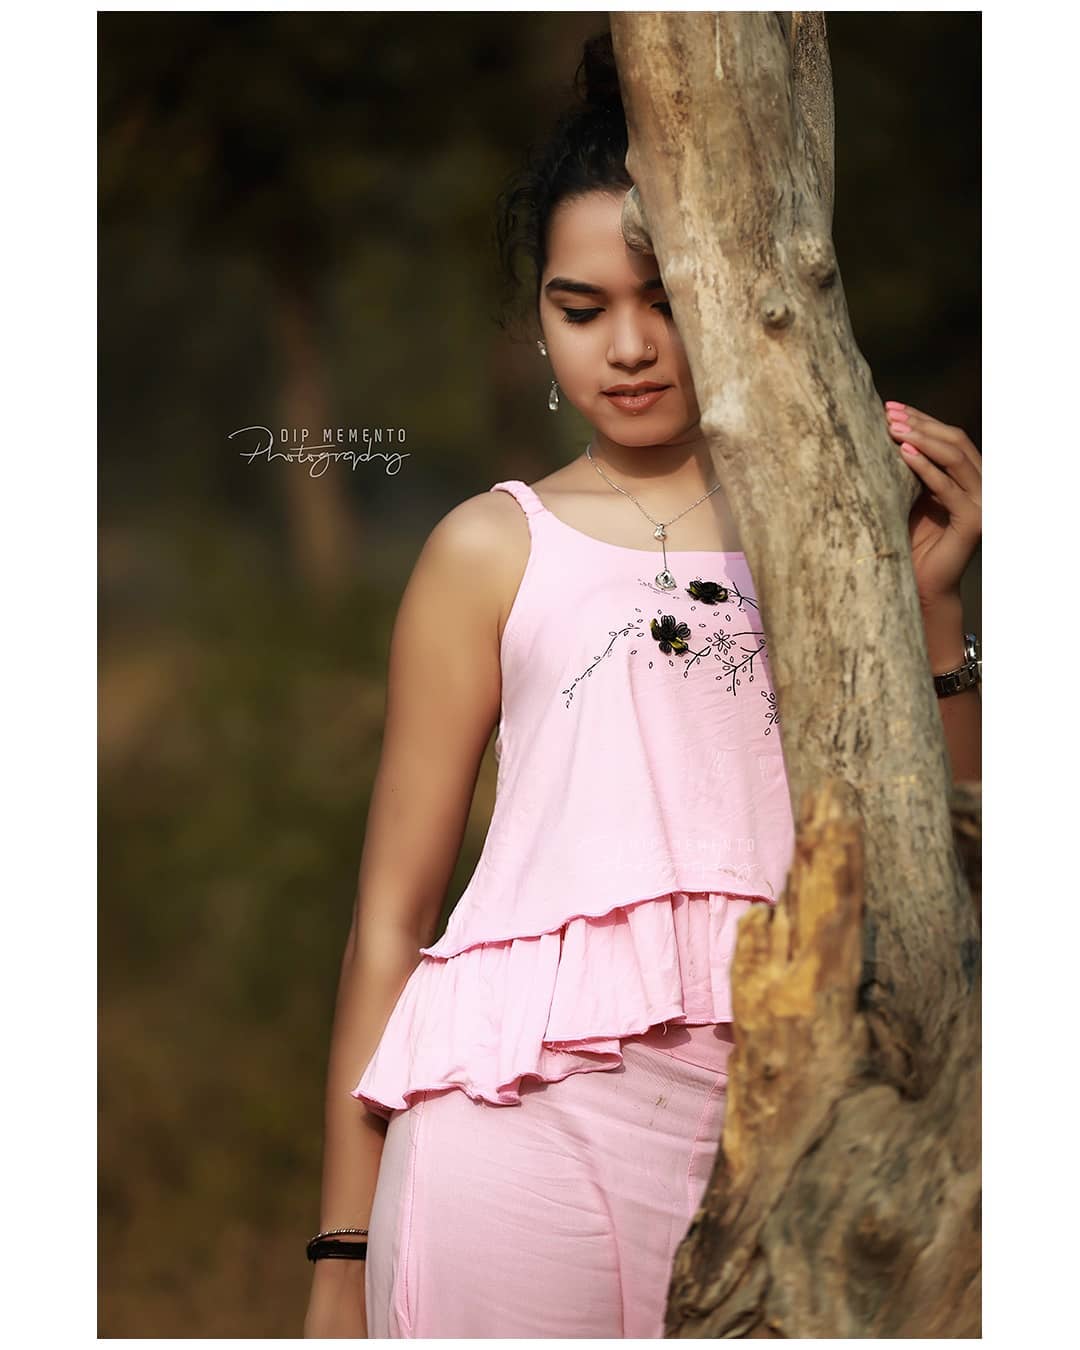 Portfolio shoot..
.
In frame - Payal
© @dip_memento_photography
.
Shoot With Canon 5d Mark iv + #Godox Hss
@canonindia_official
.
.
.
#indianportrait
#_coi #_eoi #oph #_woi
#dipmementophotography #bbc
#ahmedabadphotographer #shwetamalhotra03 # #ahmedabad
#storiesofindia #streetphotography #dipthakkar
#yourshot_india
#photographers_of_india
#mypixeldiary
#tripotocommunity
#natgeoindia
#natgeoyourshot
#dslrofficial #indianphotography #indiapictures
 #blogphotography

@natgeoindia @historytv18 @history @official_photographers_hub @earthpix @earthofficial
@photographers.of.india @photographers_of_india
@dslrofficial @india.pictures @depths_of_world @depthobsessed @visualsofjulius @bbcearth @goodearthindia @earth @discovery @discoverychannelin @lonelyplanetindia @lonelyplanet @lightroom #9924227745 #dipmementophotography #dip_memento_photography